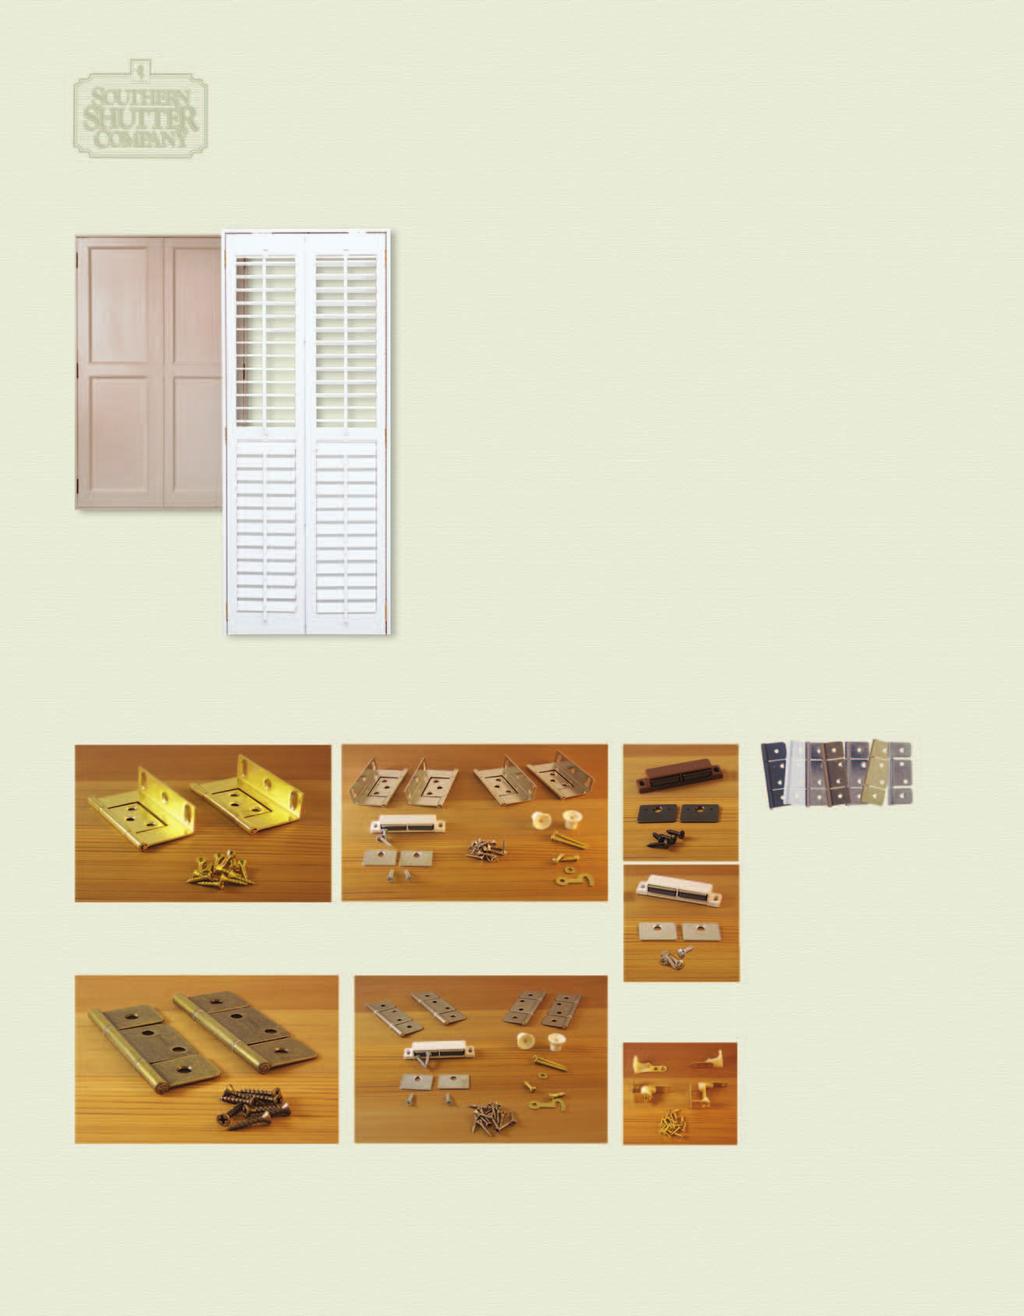 INTERIOR WOOD SHUTTERS Finishing Options and Hardware for Interior Wood s Order Your Interior s Finished, Framed and Ready-to-Install Quality s Deserve a Quality Finish!